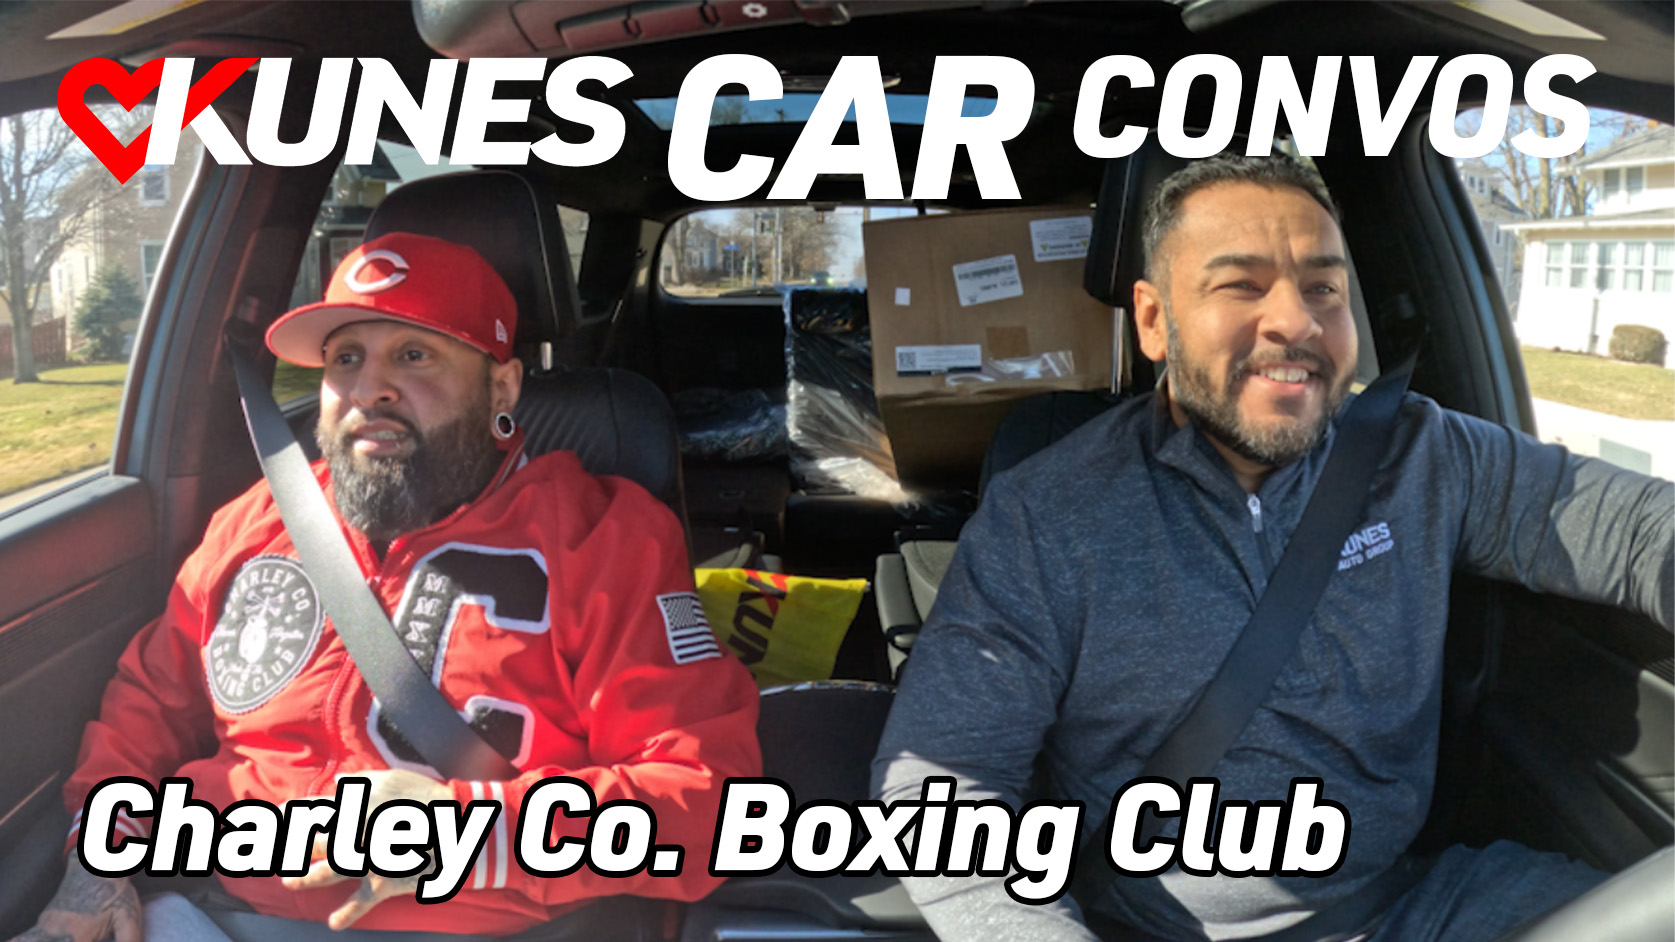 Kunes Car Convos, Charley Co. Boxing Club